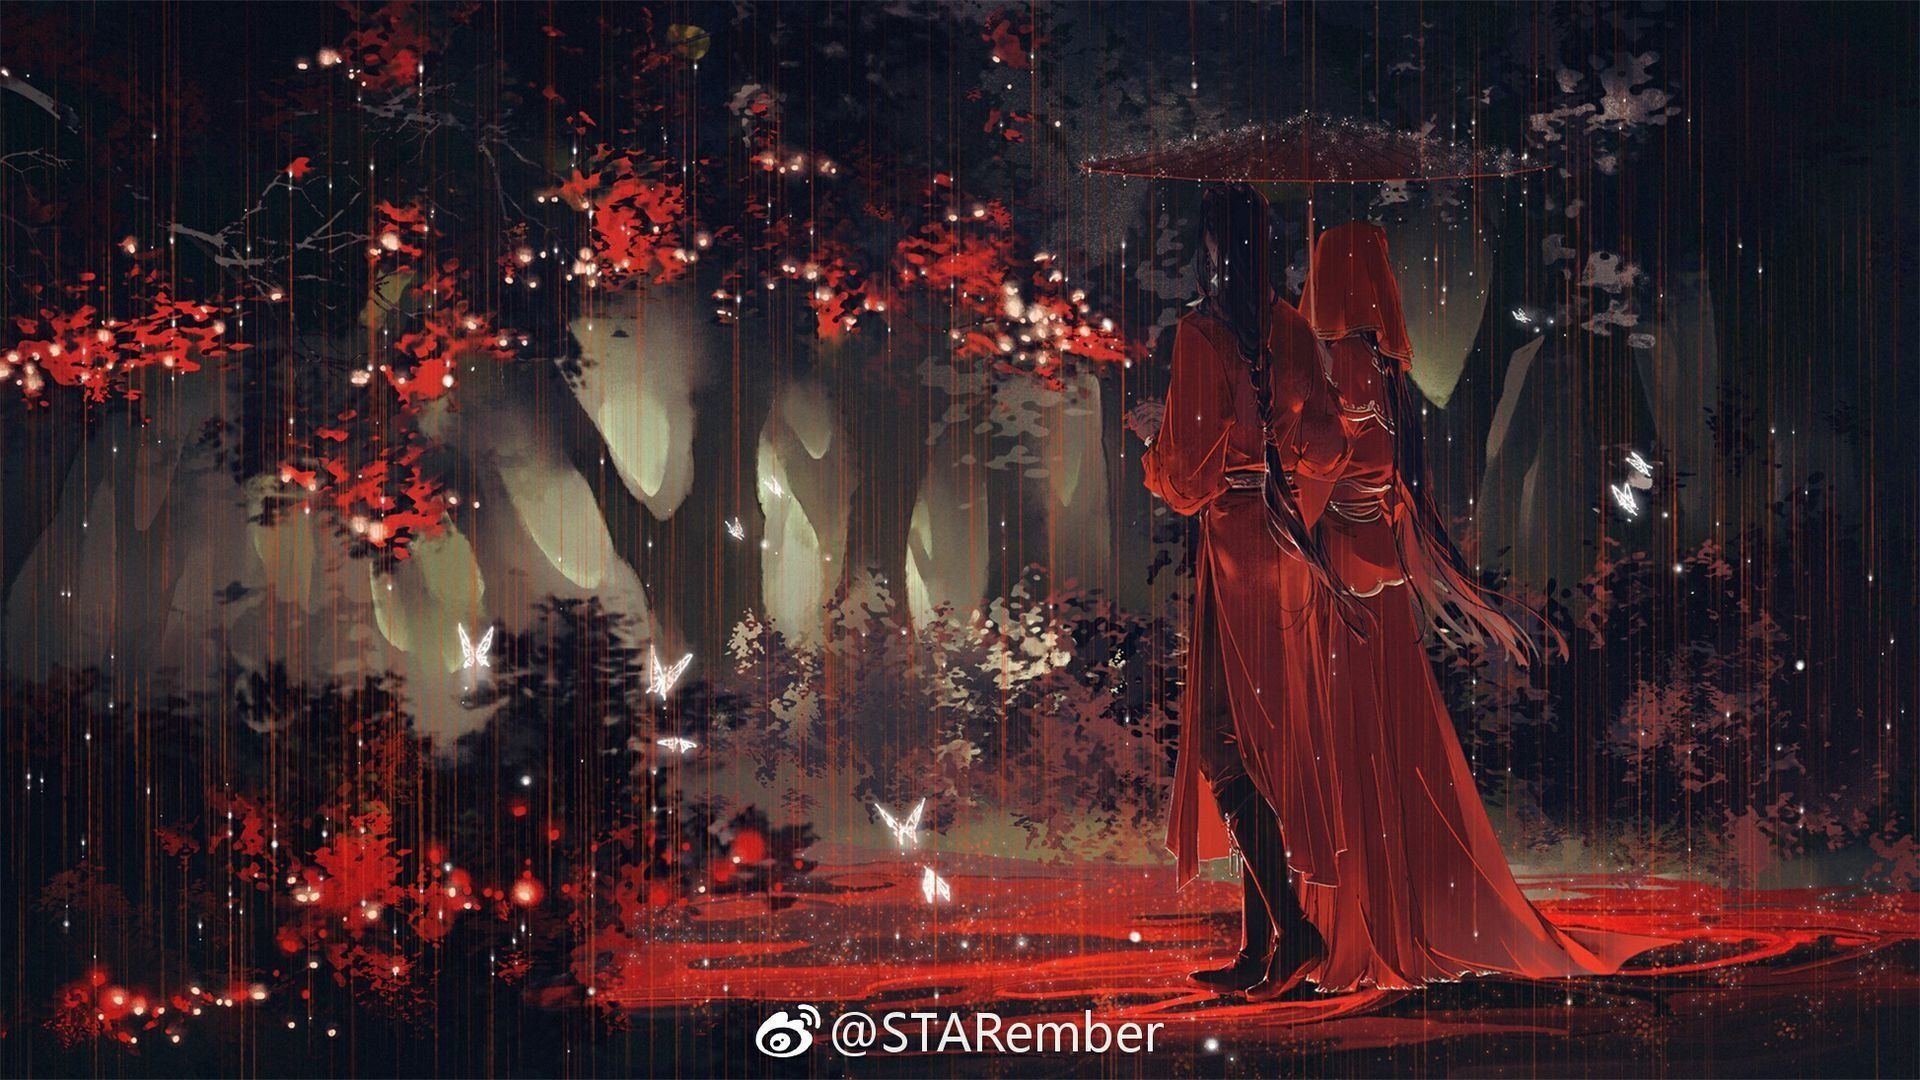 Two figures in red cloaks stand under a red umbrella in a forest. - Crimson